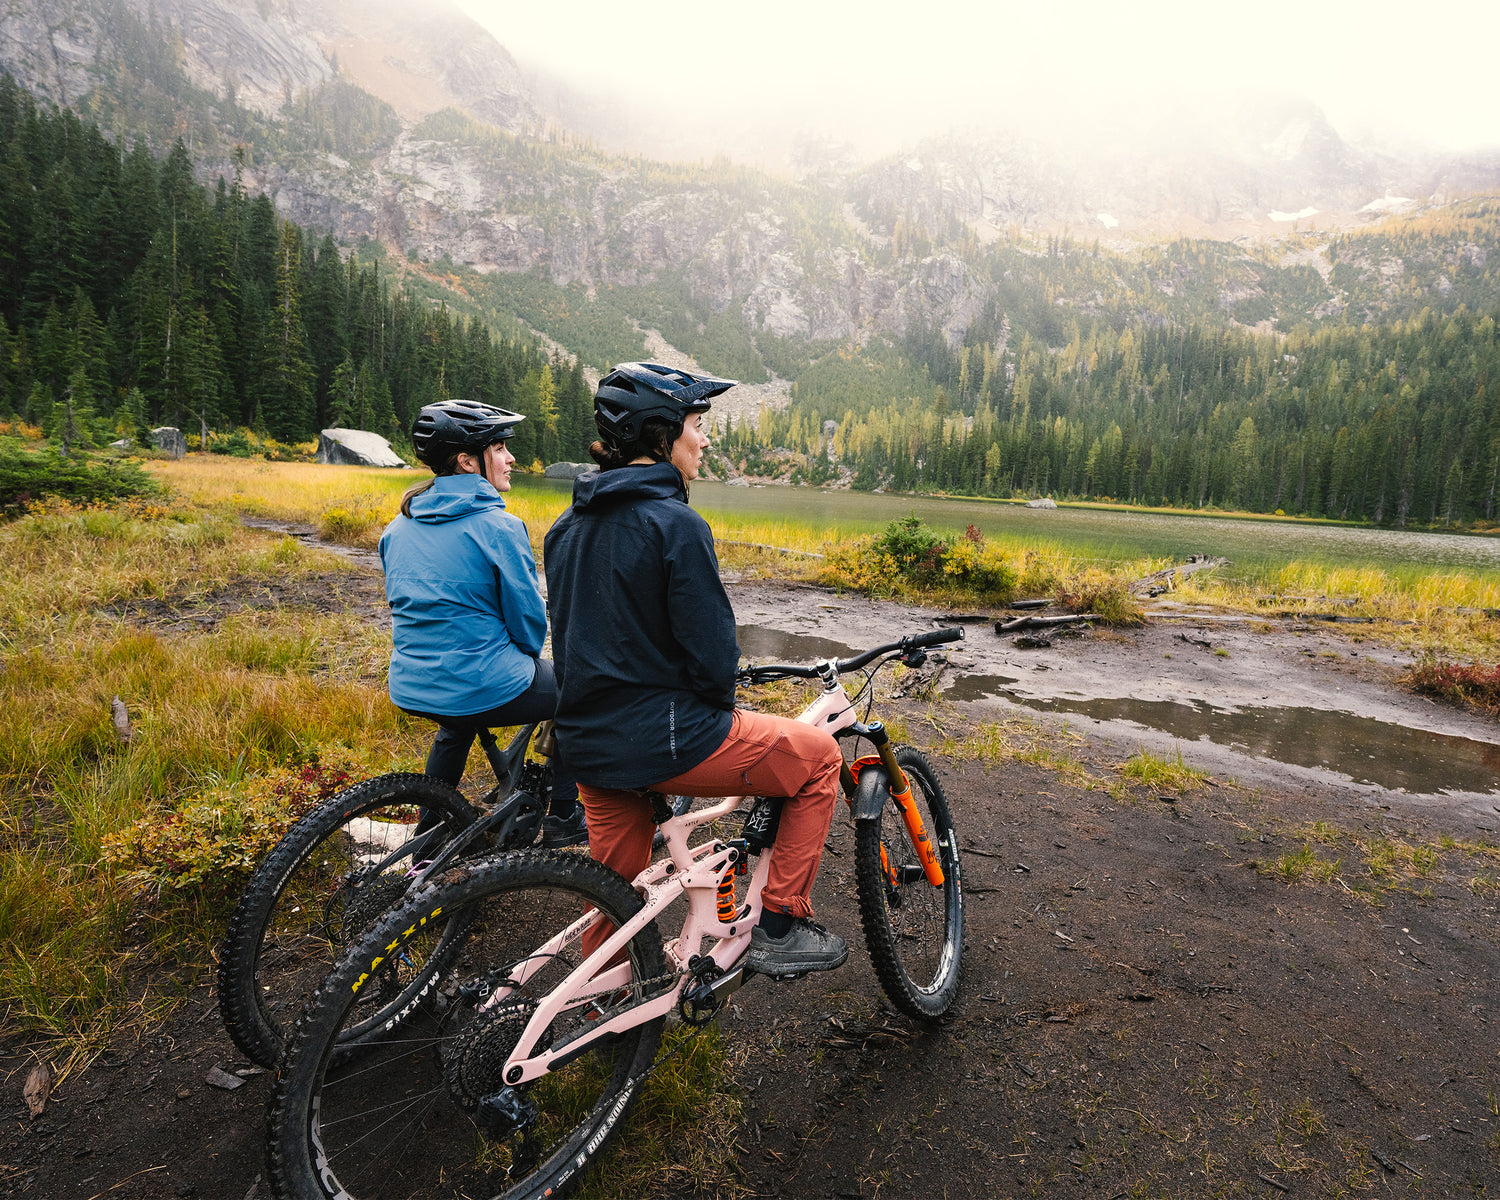 Two mountain bikers take in a view of the mountains while sitting on their bikes on a wet, muddy day.